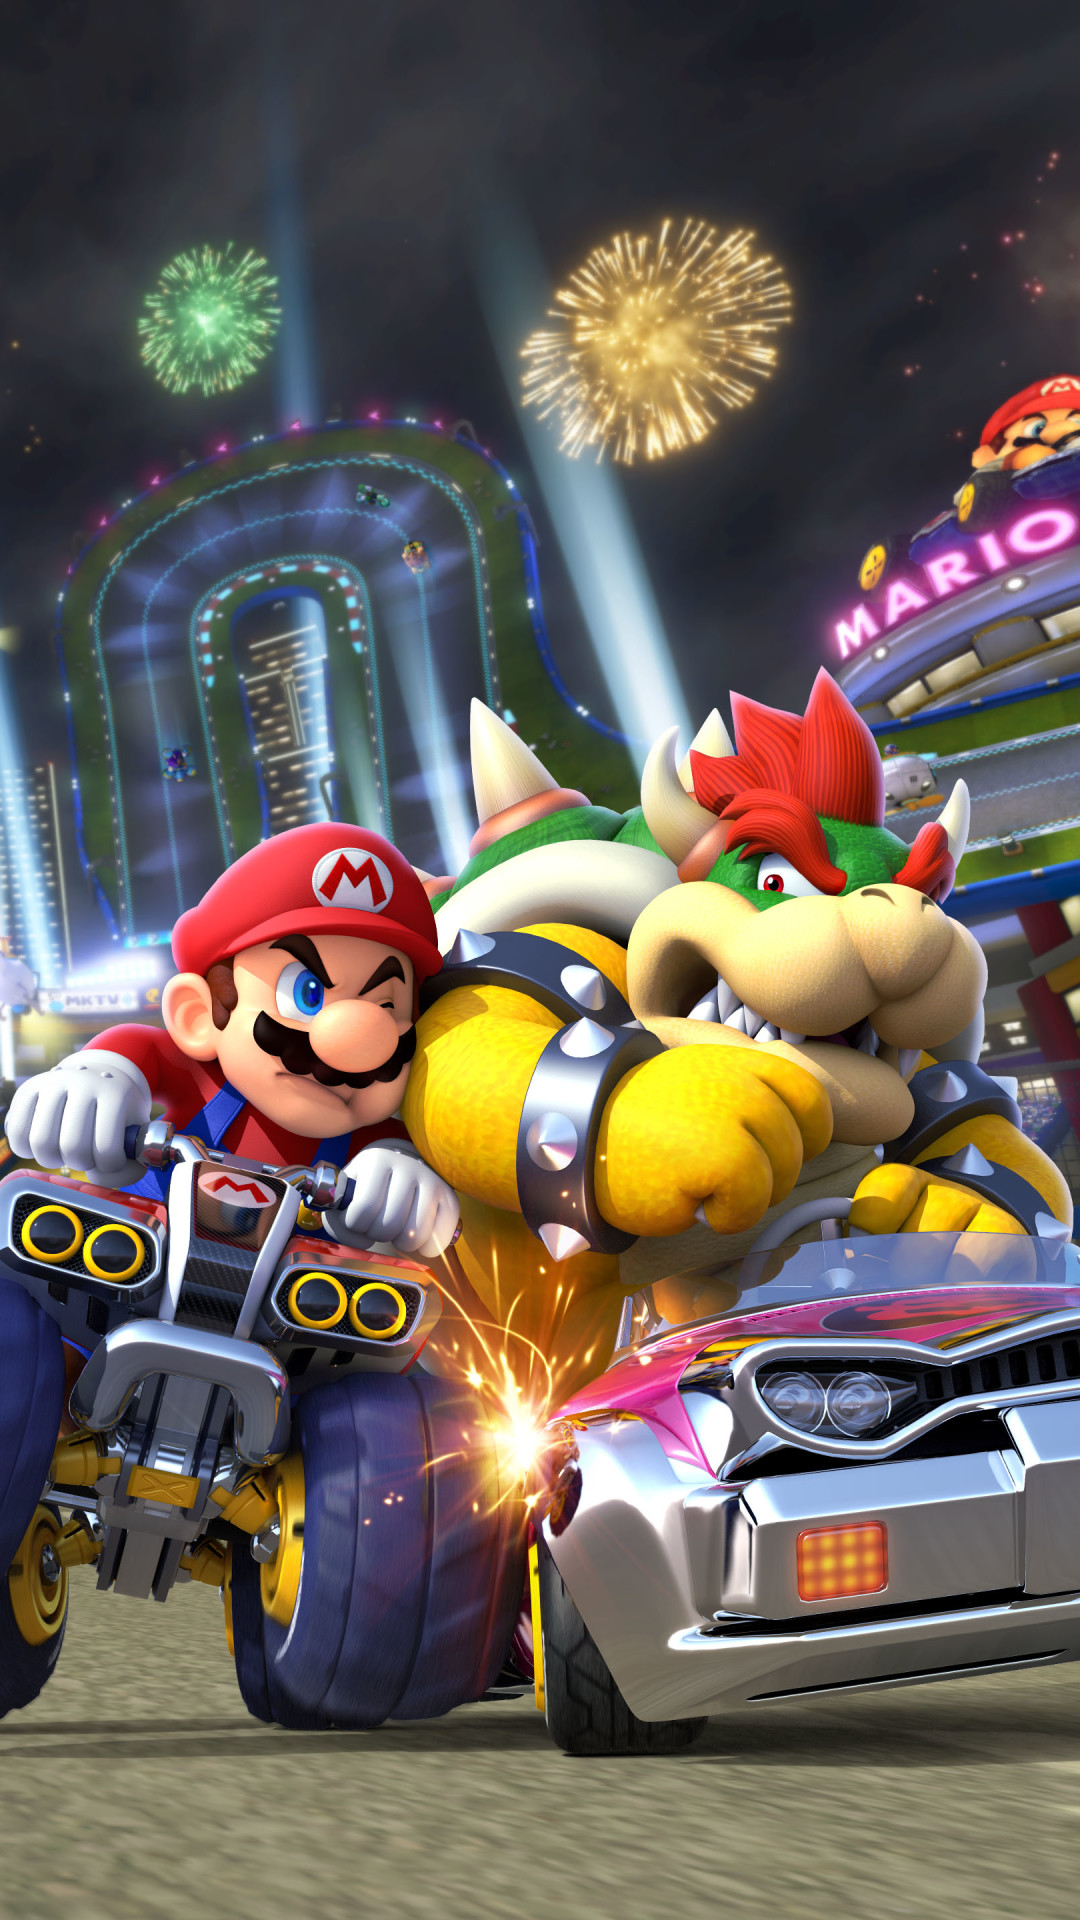 Wallpaper 8 Deluxe Wallpaper Mario Kart / Every day new pictures ...